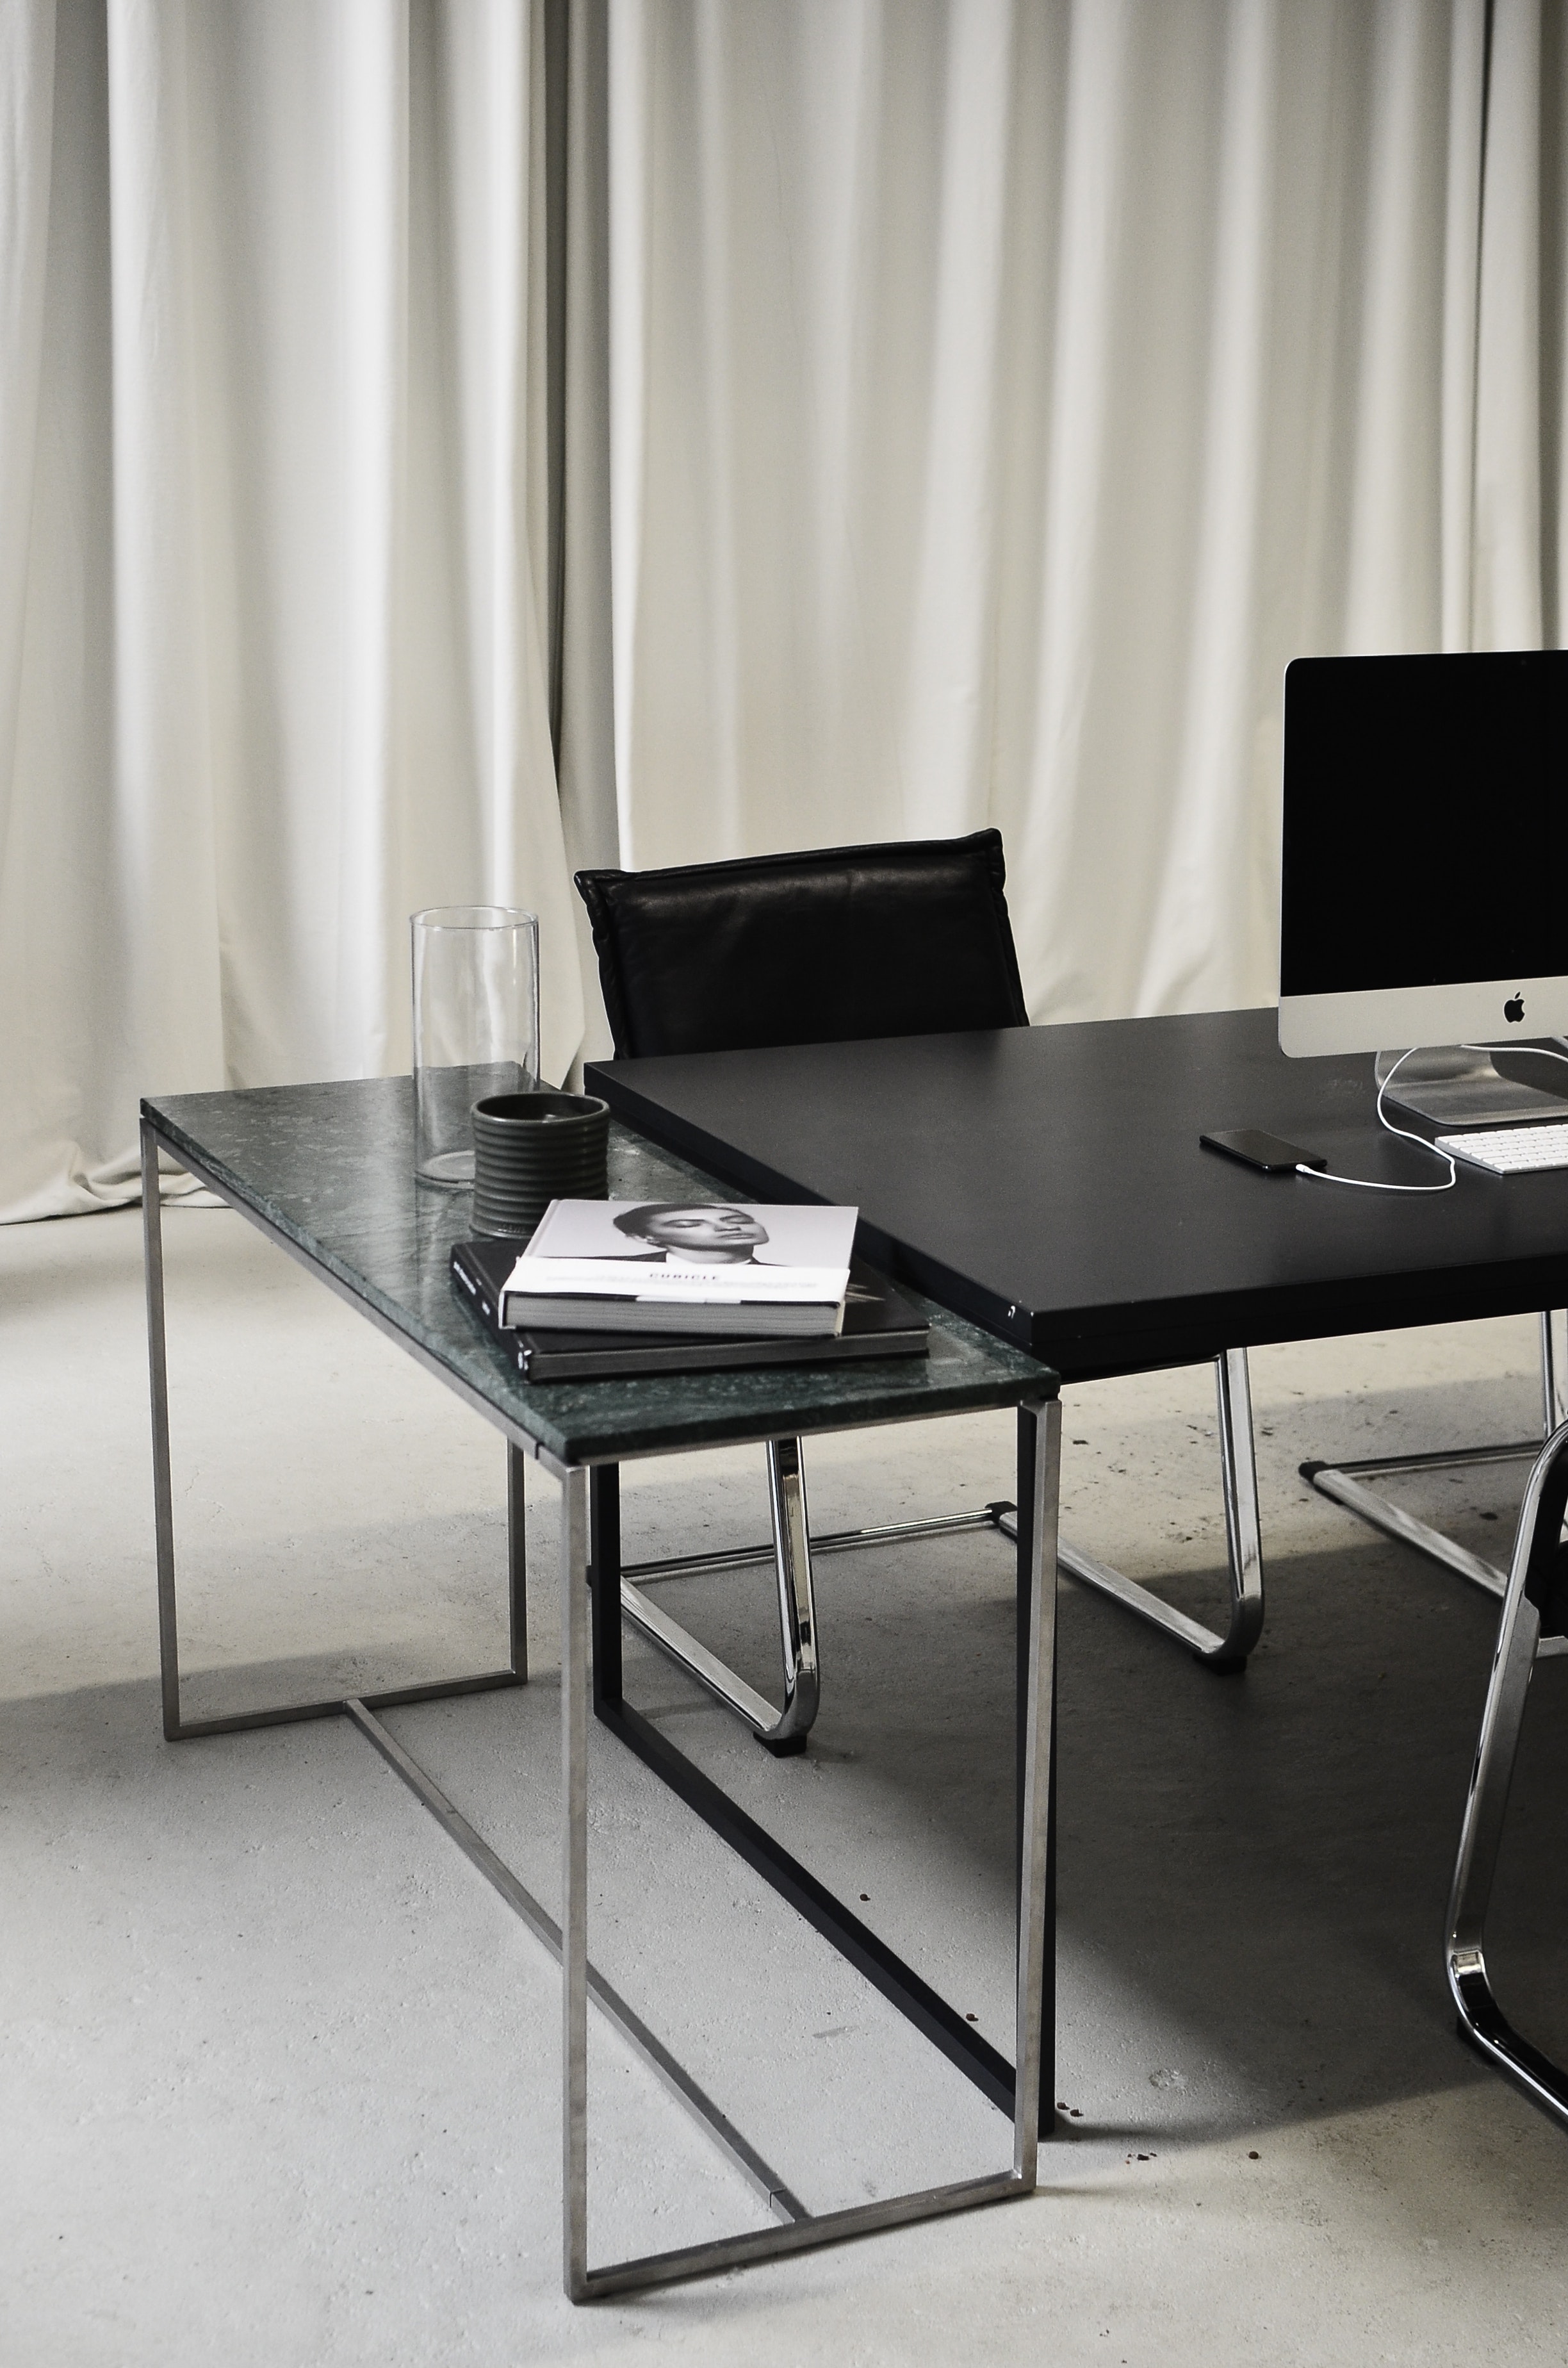 black desk with mac desktop, glass and magazine on top with white curtain backgroun